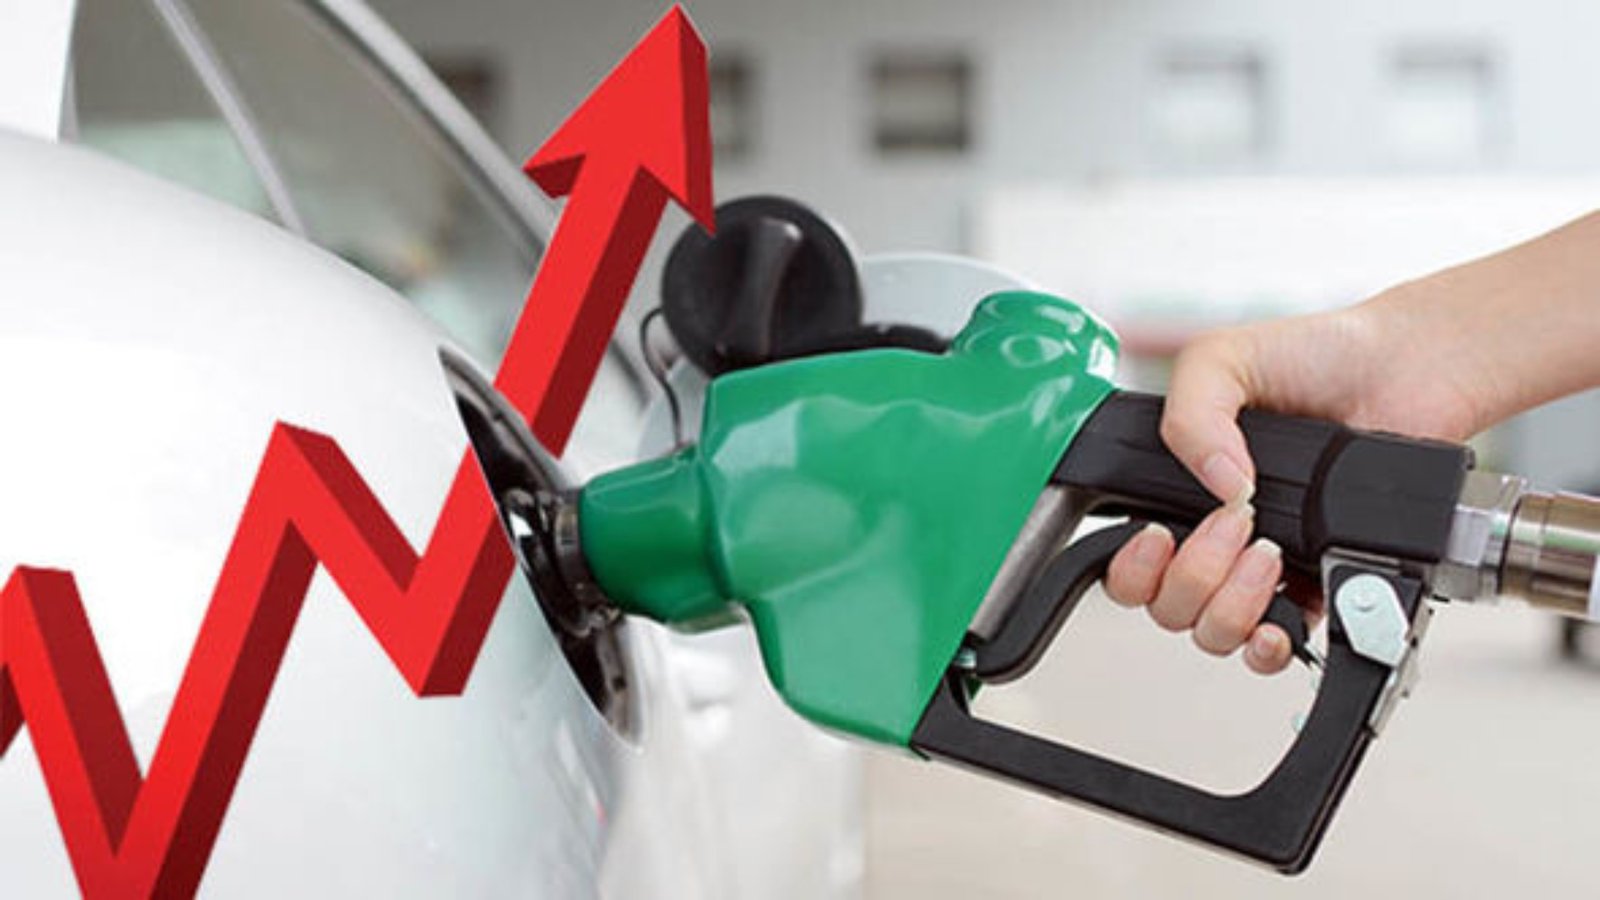 When will petrol prices go up in Pakistan?